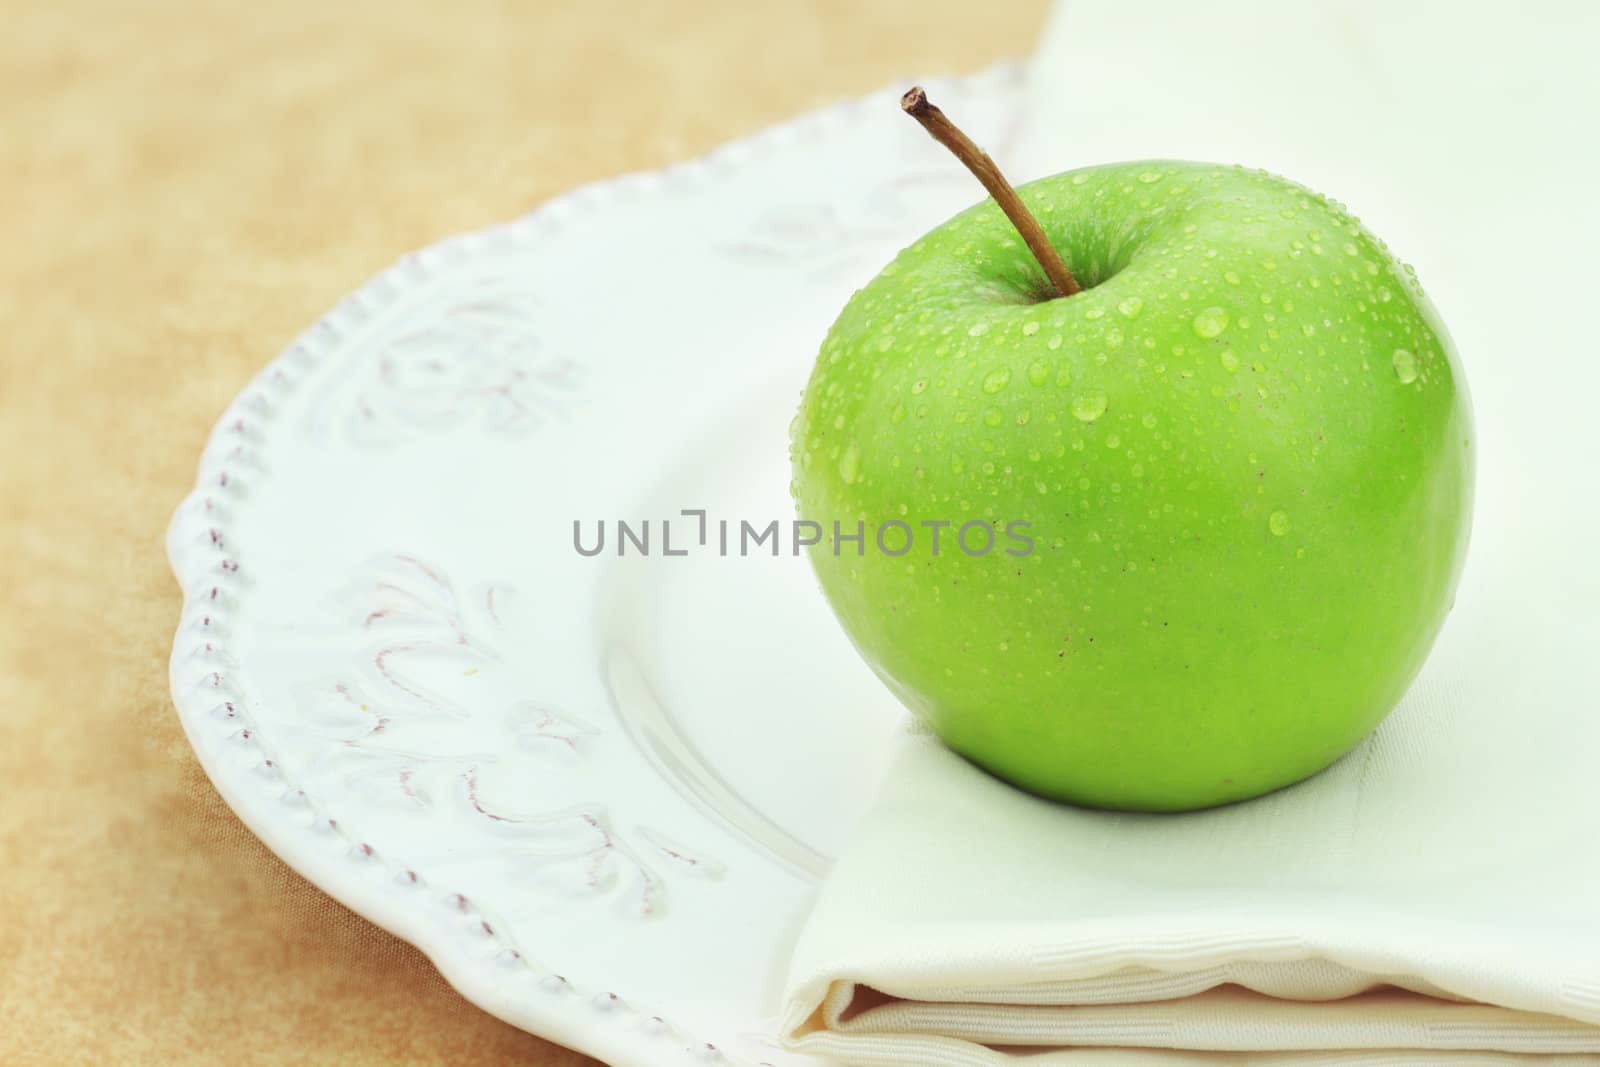 Green apple with water droplets on a dinner plate.